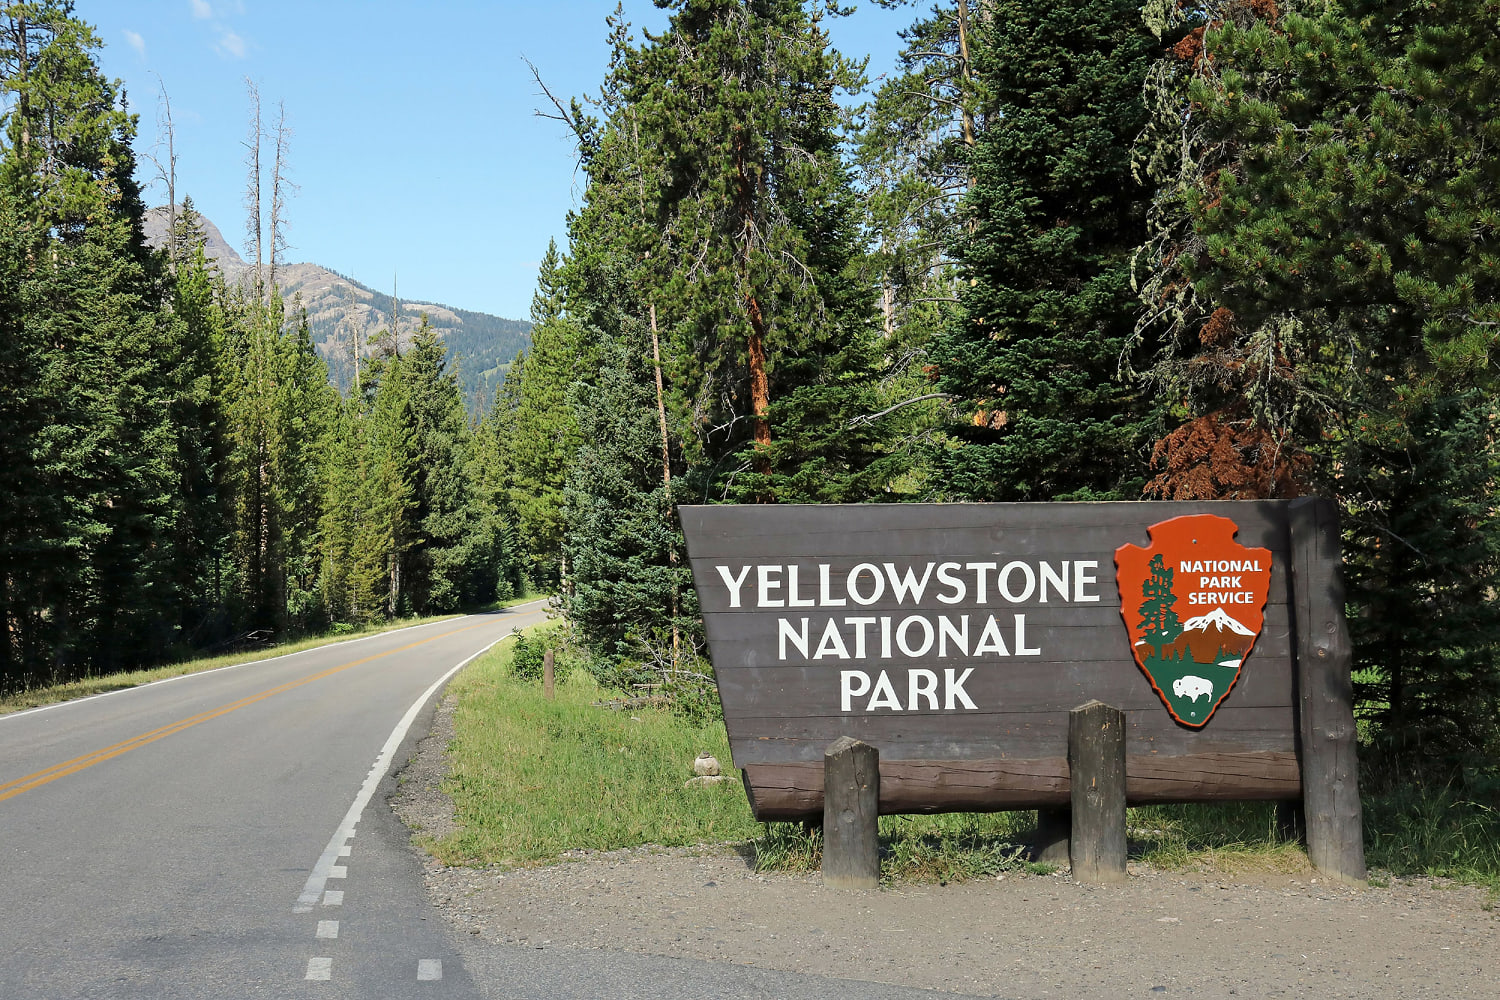 Shooting at Yellowstone National Park on July Fourth injures ranger, kills suspect